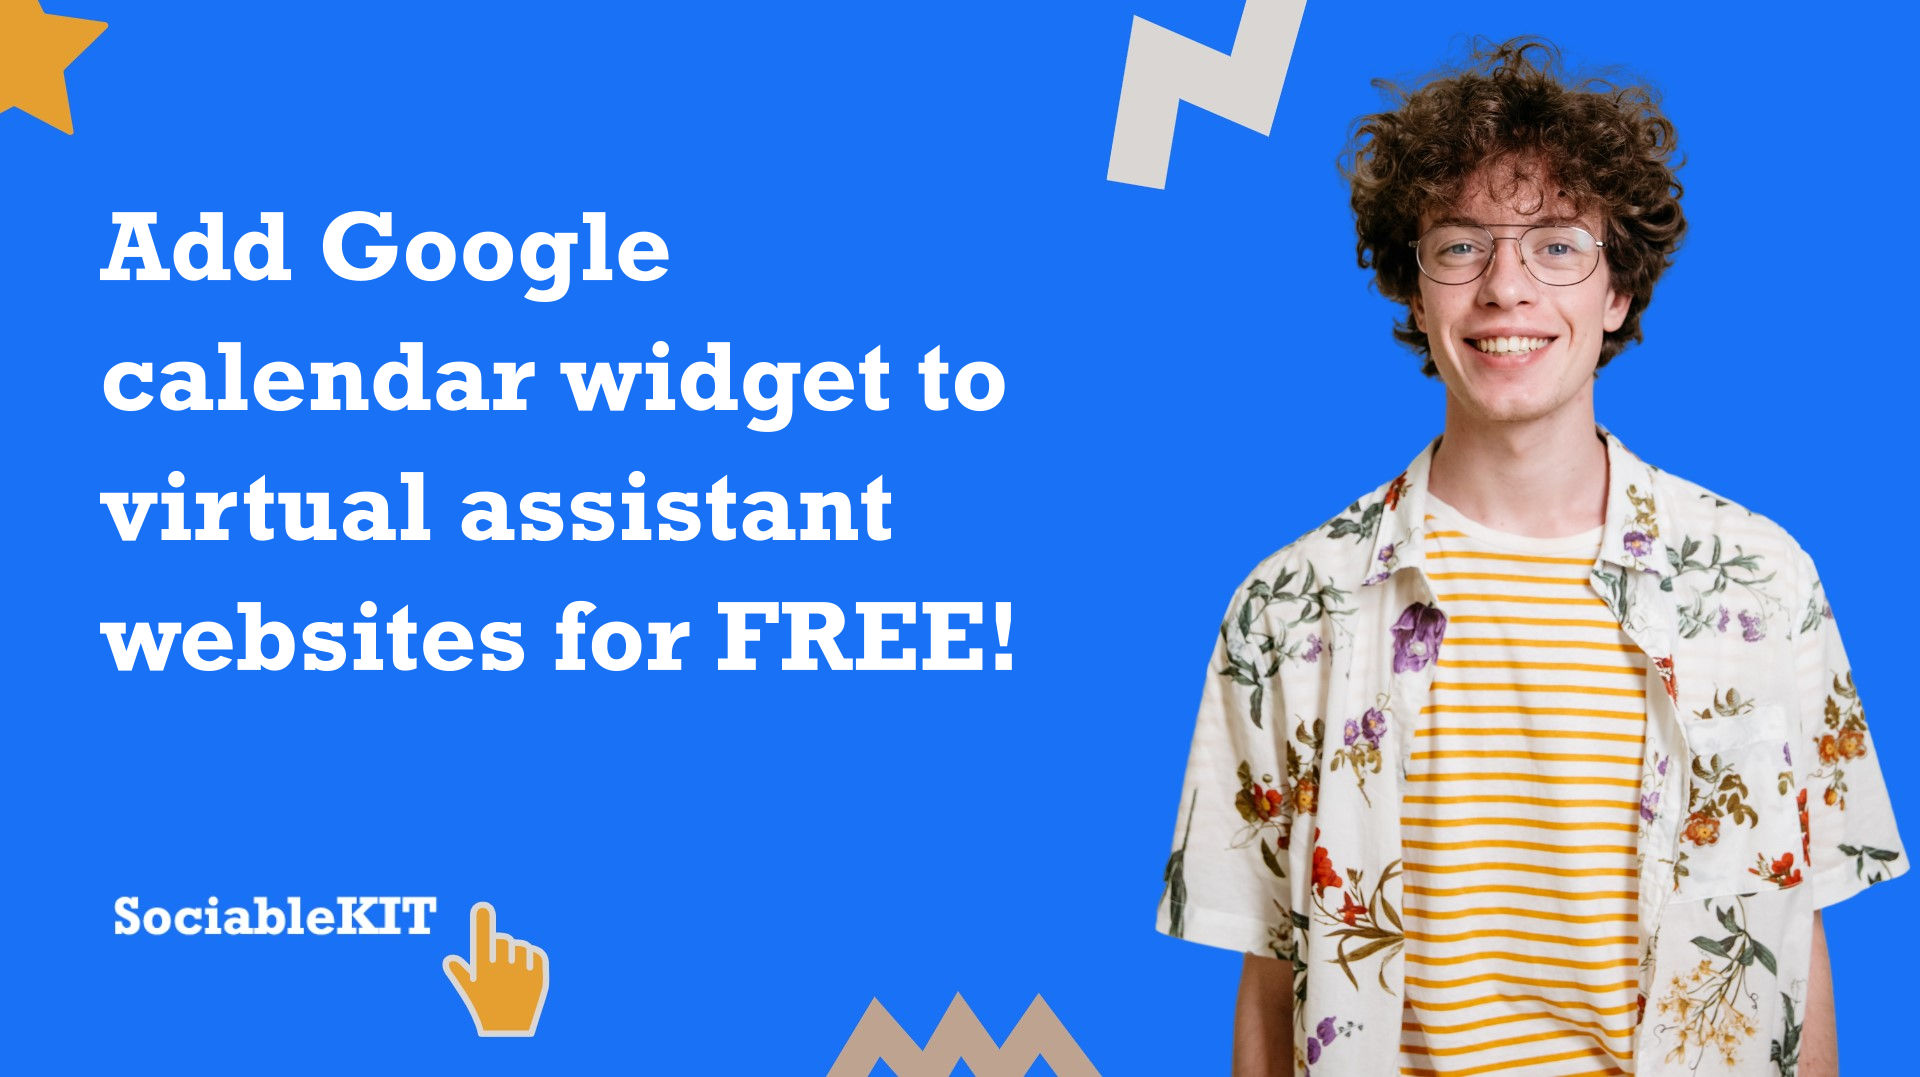 How to add Google calendar widget to virtual assistant websites for FREE?